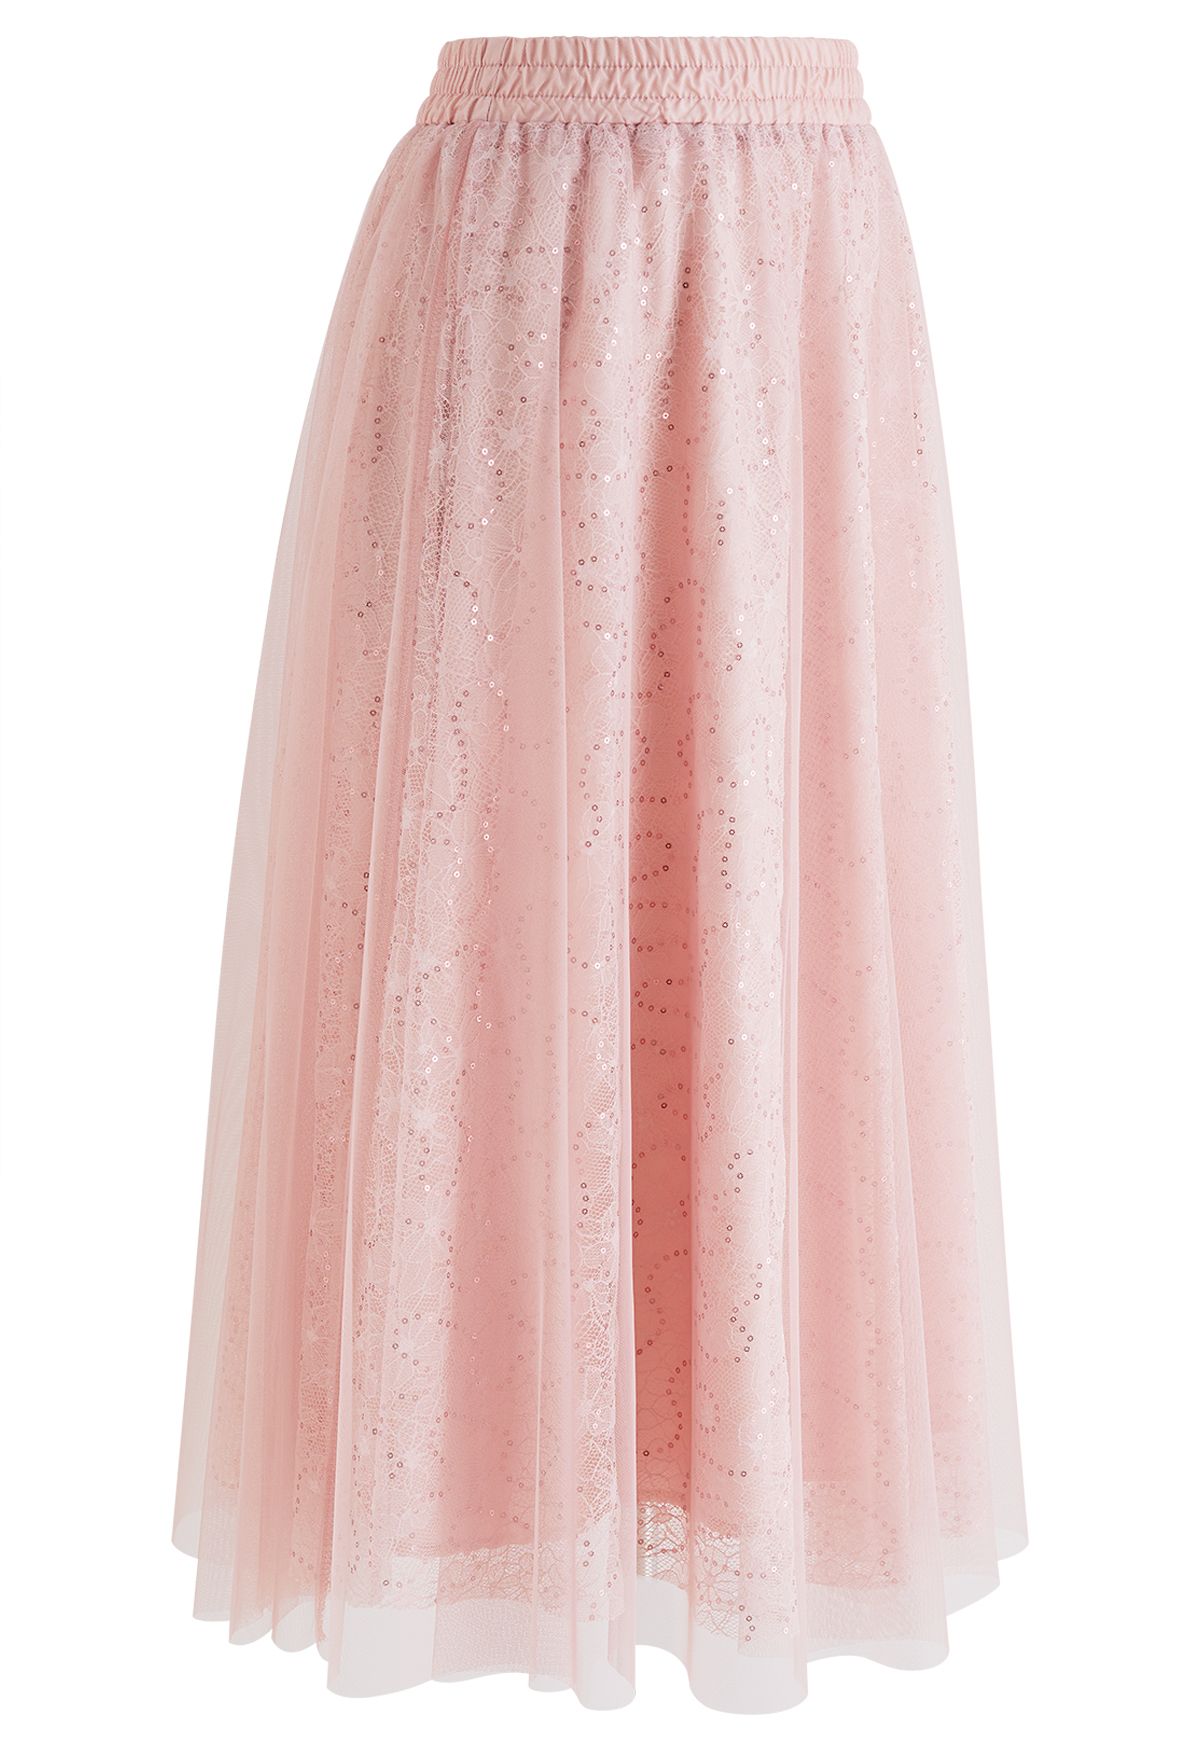 Sequined Floral Lace Mesh Tulle Skirt in Pink